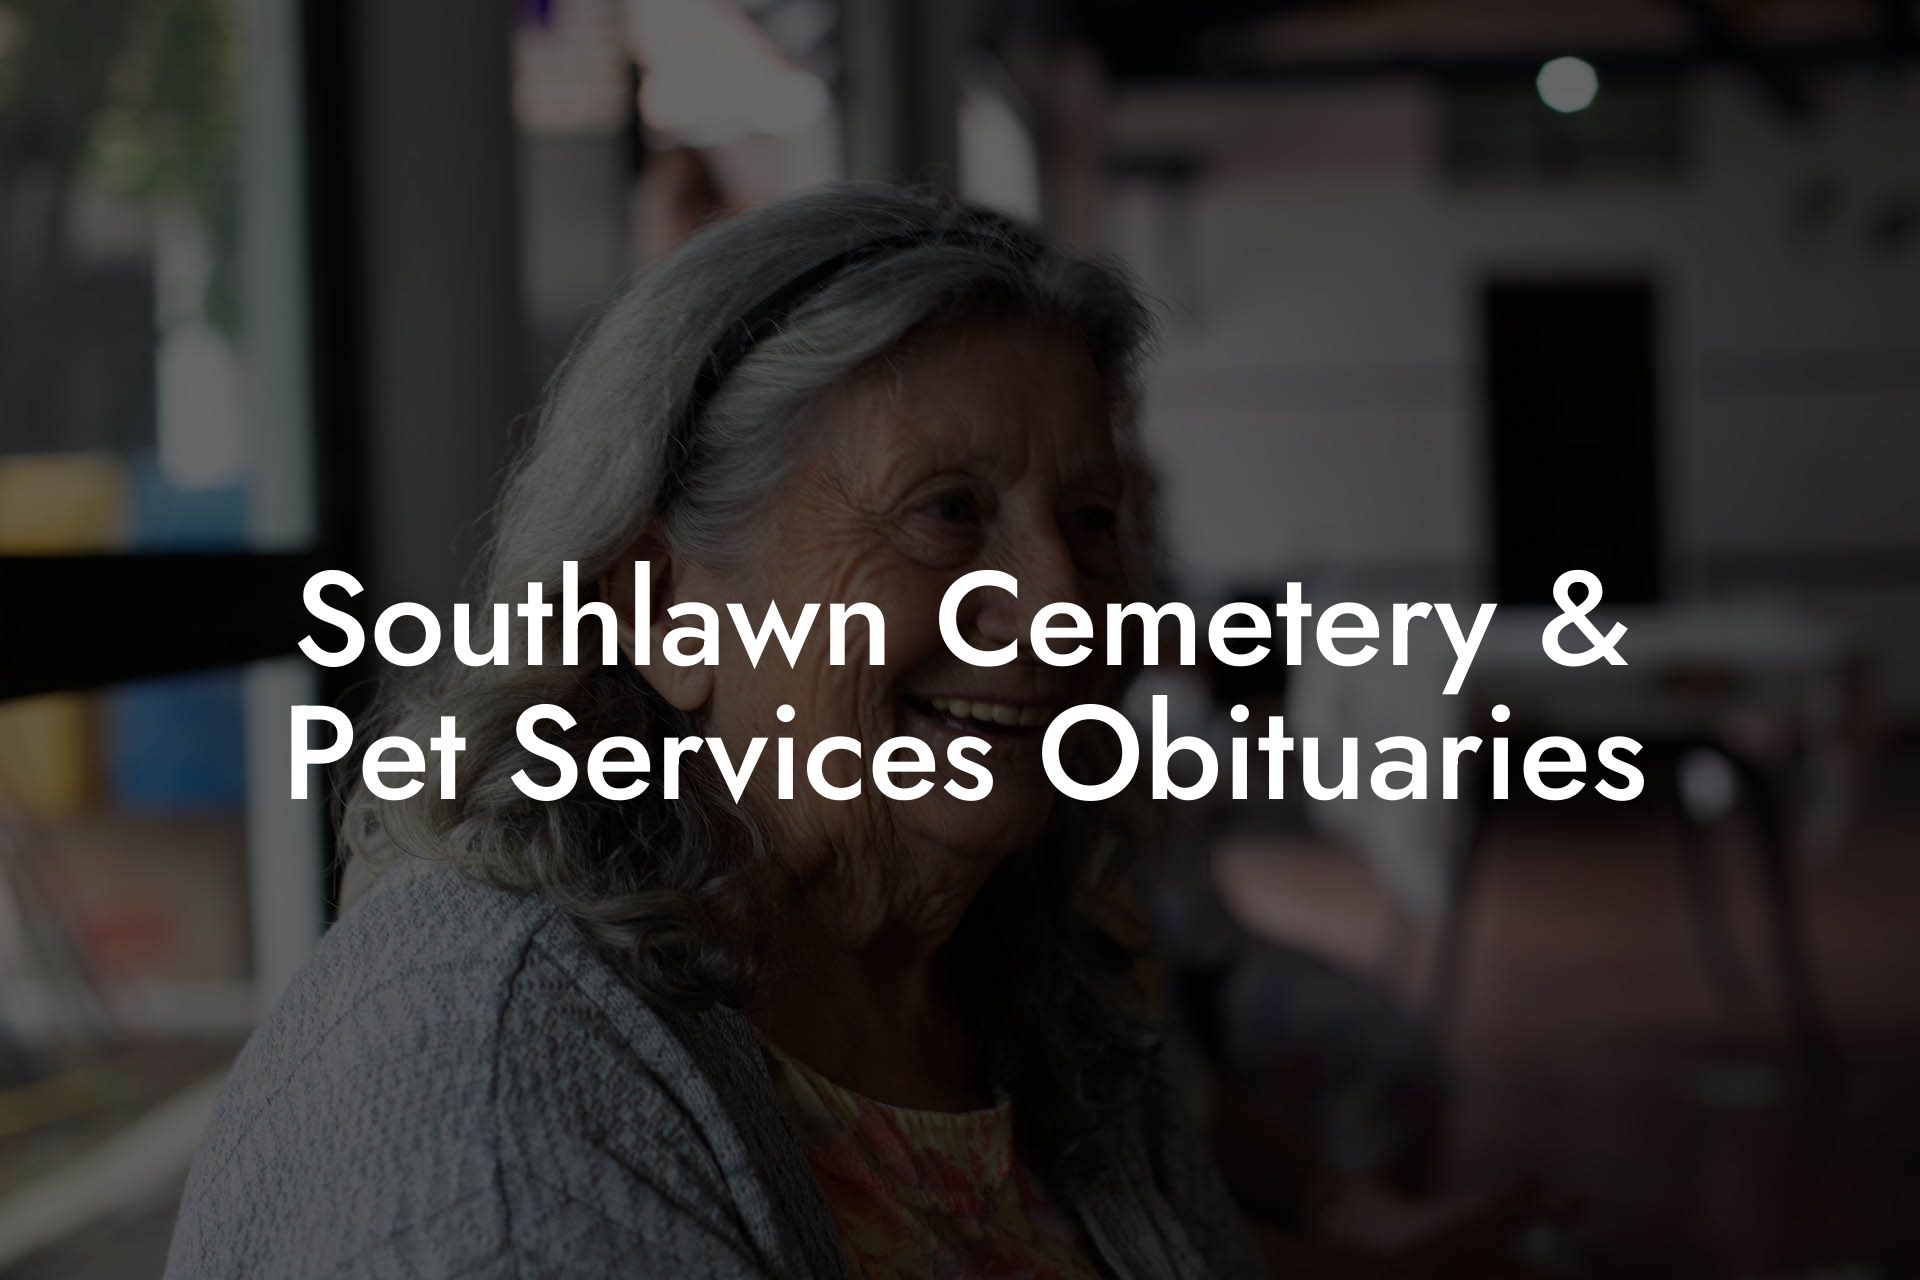 Southlawn Cemetery & Pet Services Obituaries